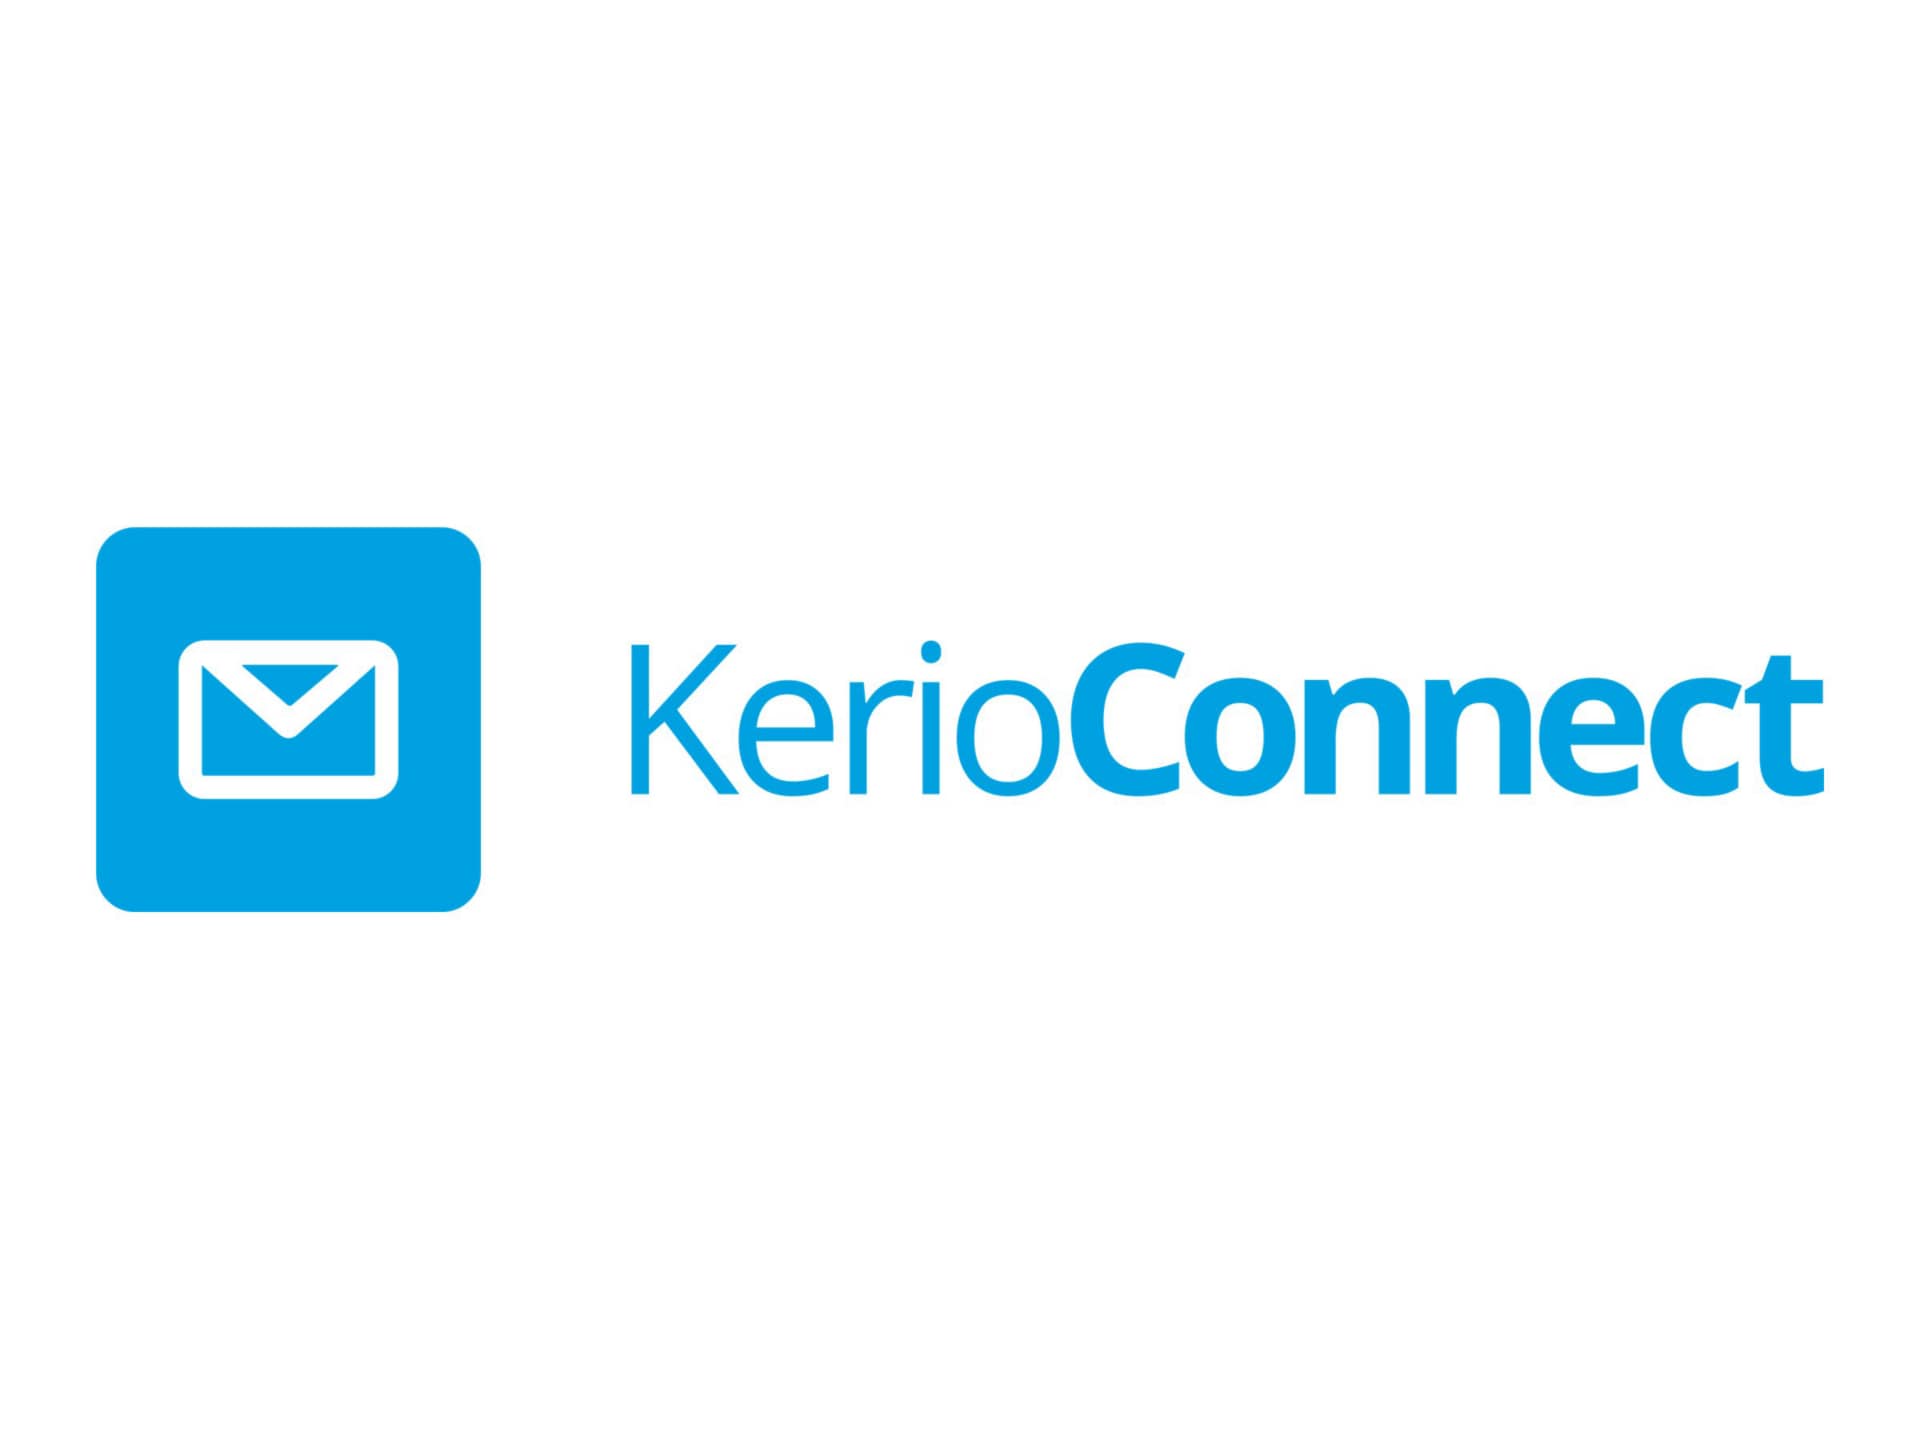 Kerio Connect Anti-spam Add-on - subscription license renewal (1 year) - 1